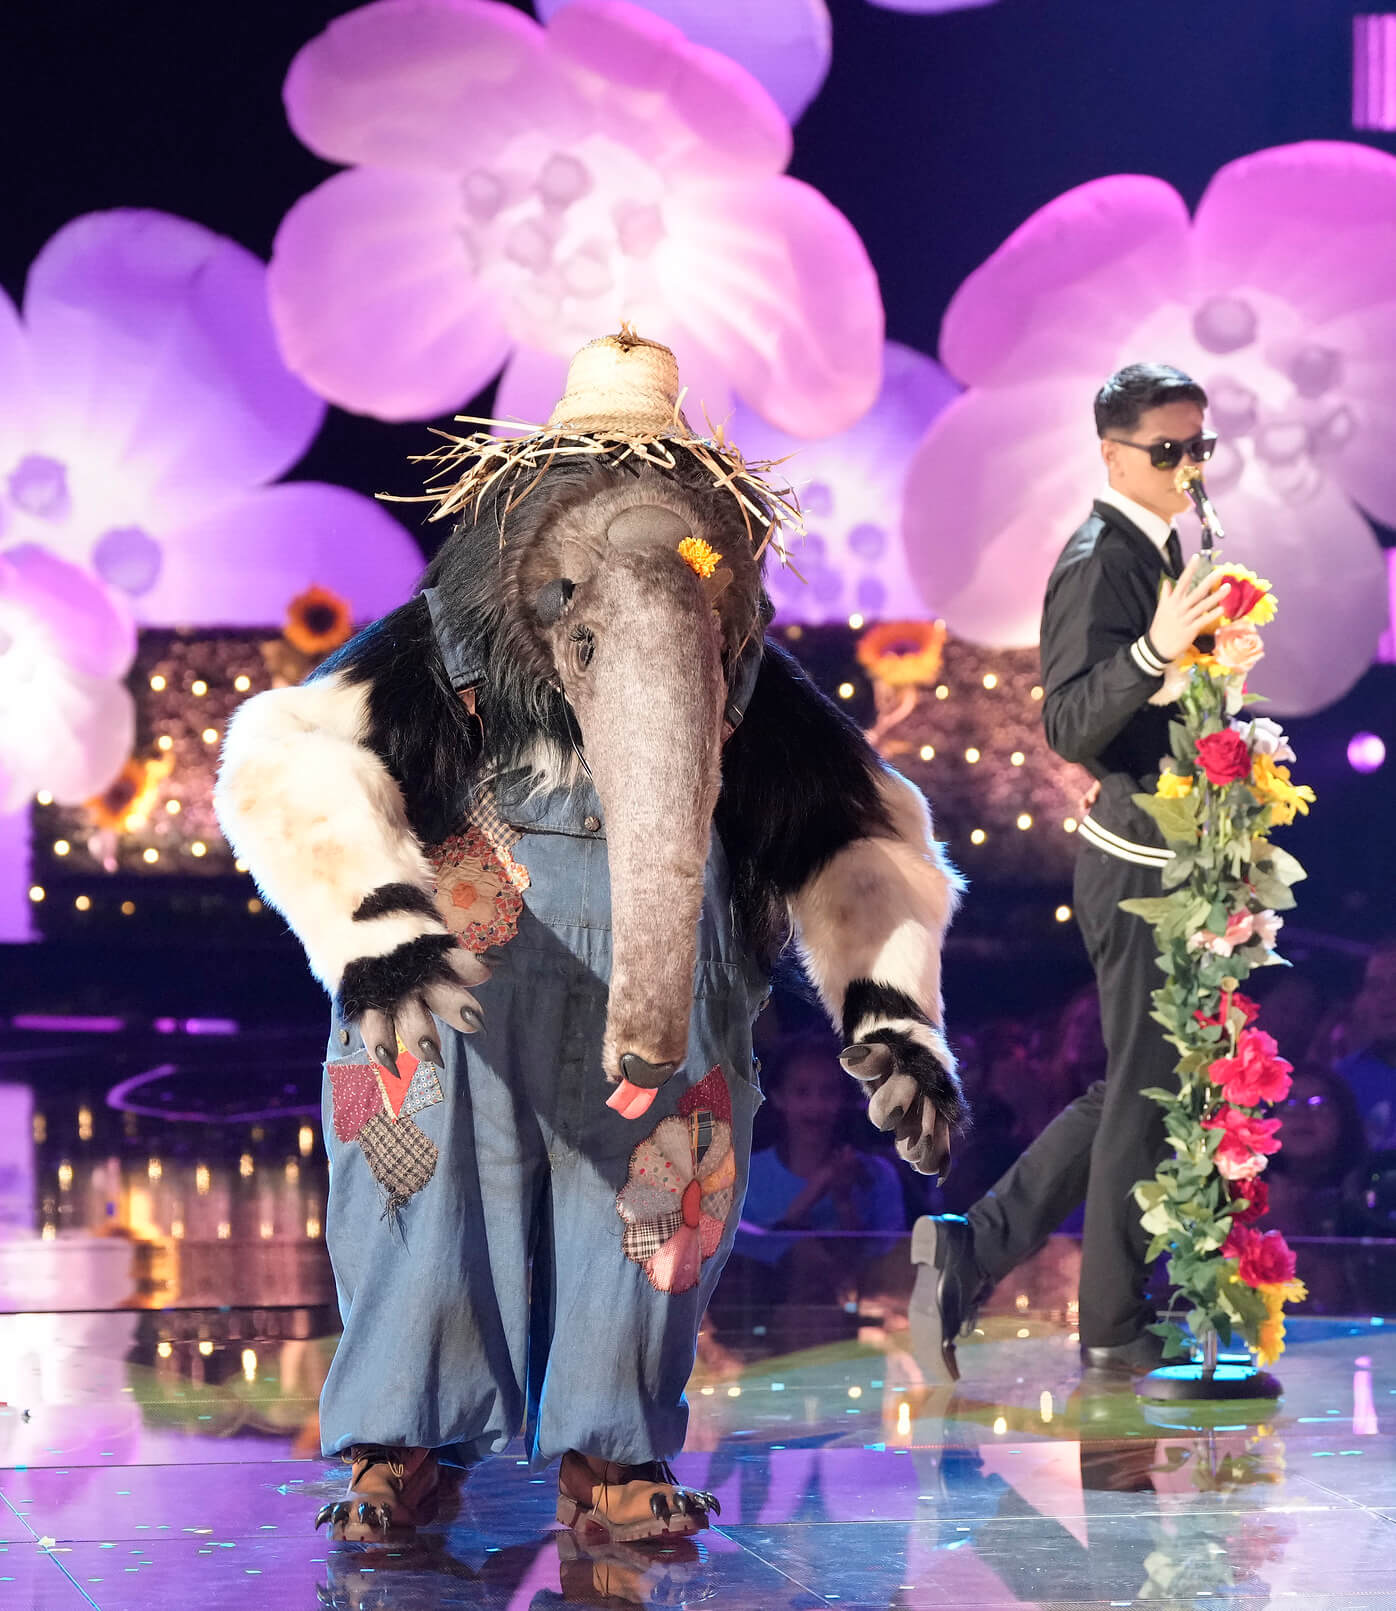 Anteater singing on stage in 'The Masked Singer' Season 10